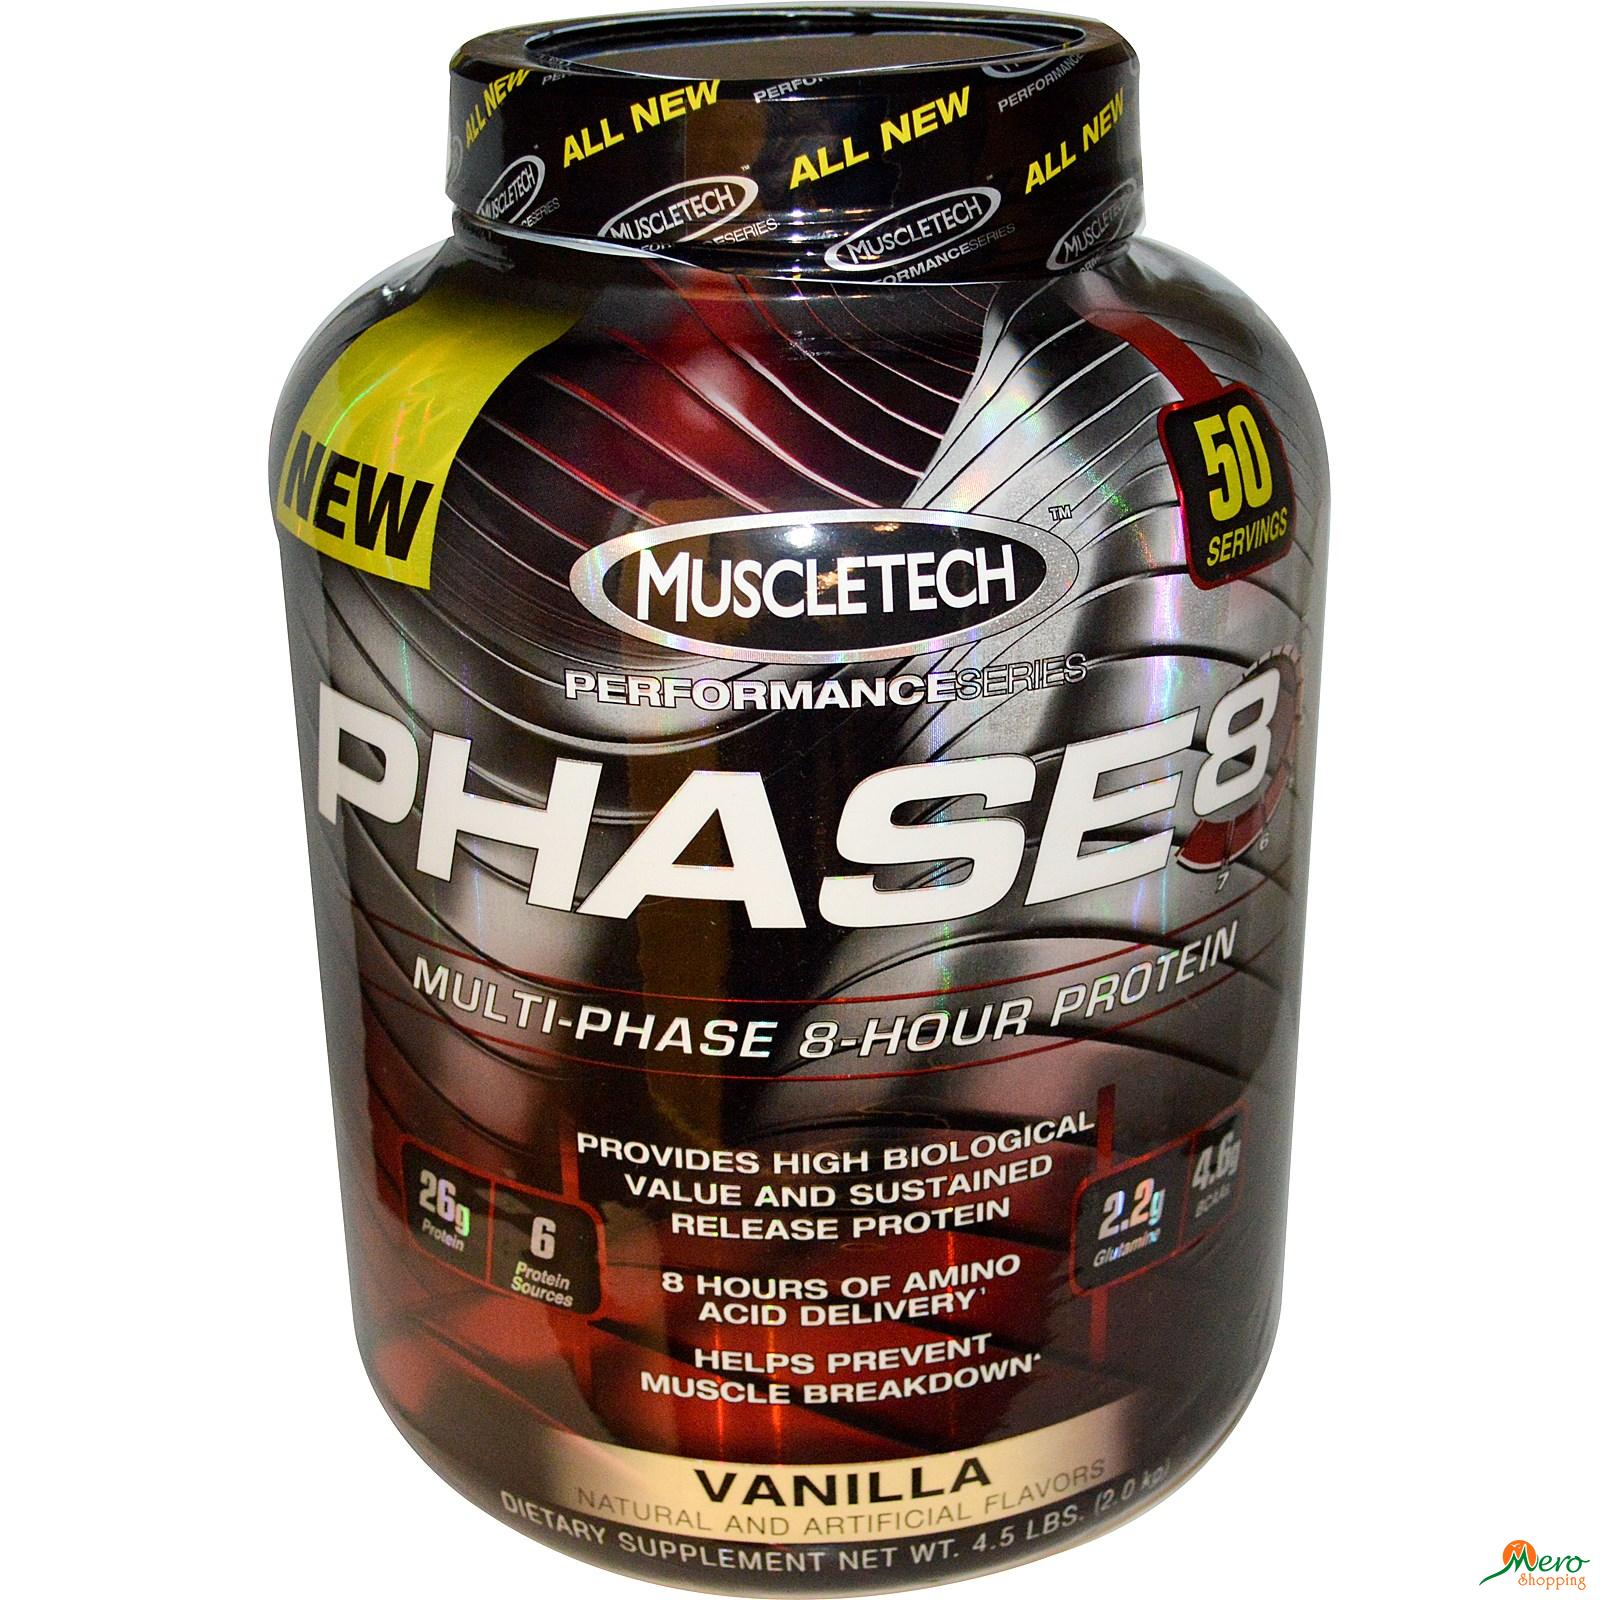 MT Phase 8 Multi Phase 8 Hour Protein 4.5 Lb (22 servings)